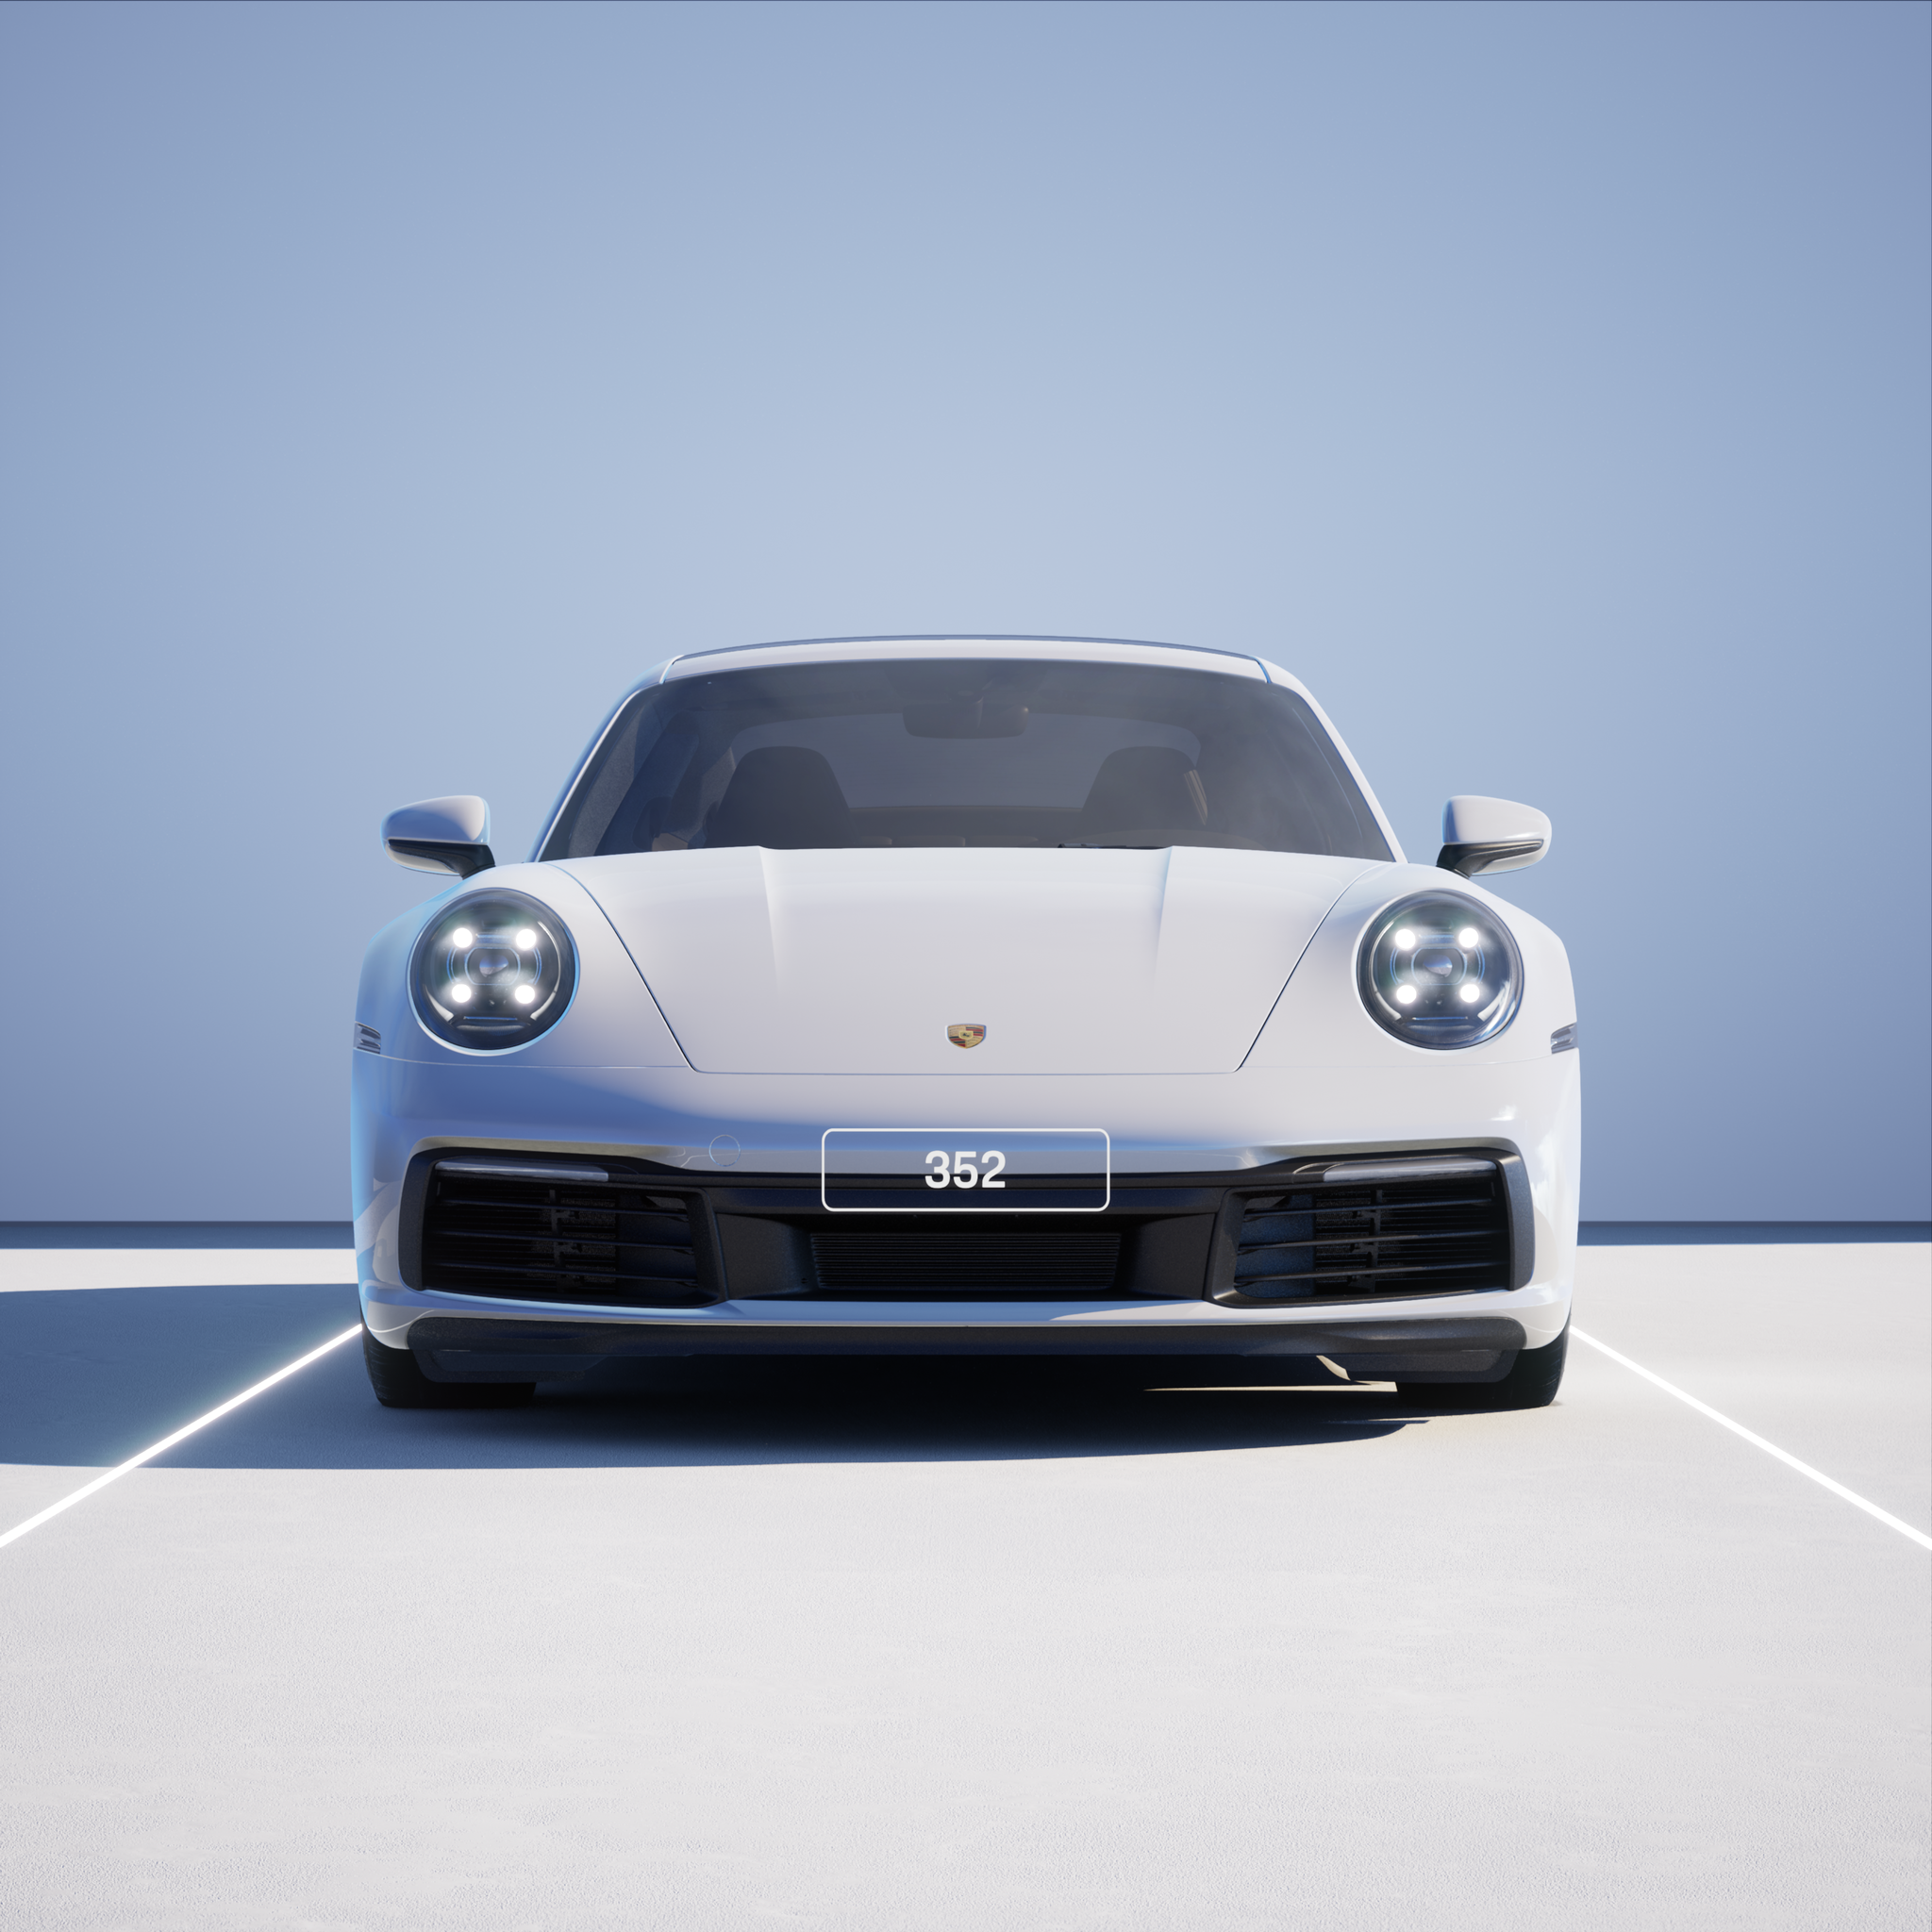 The PORSCHΞ 911 352 image in phase